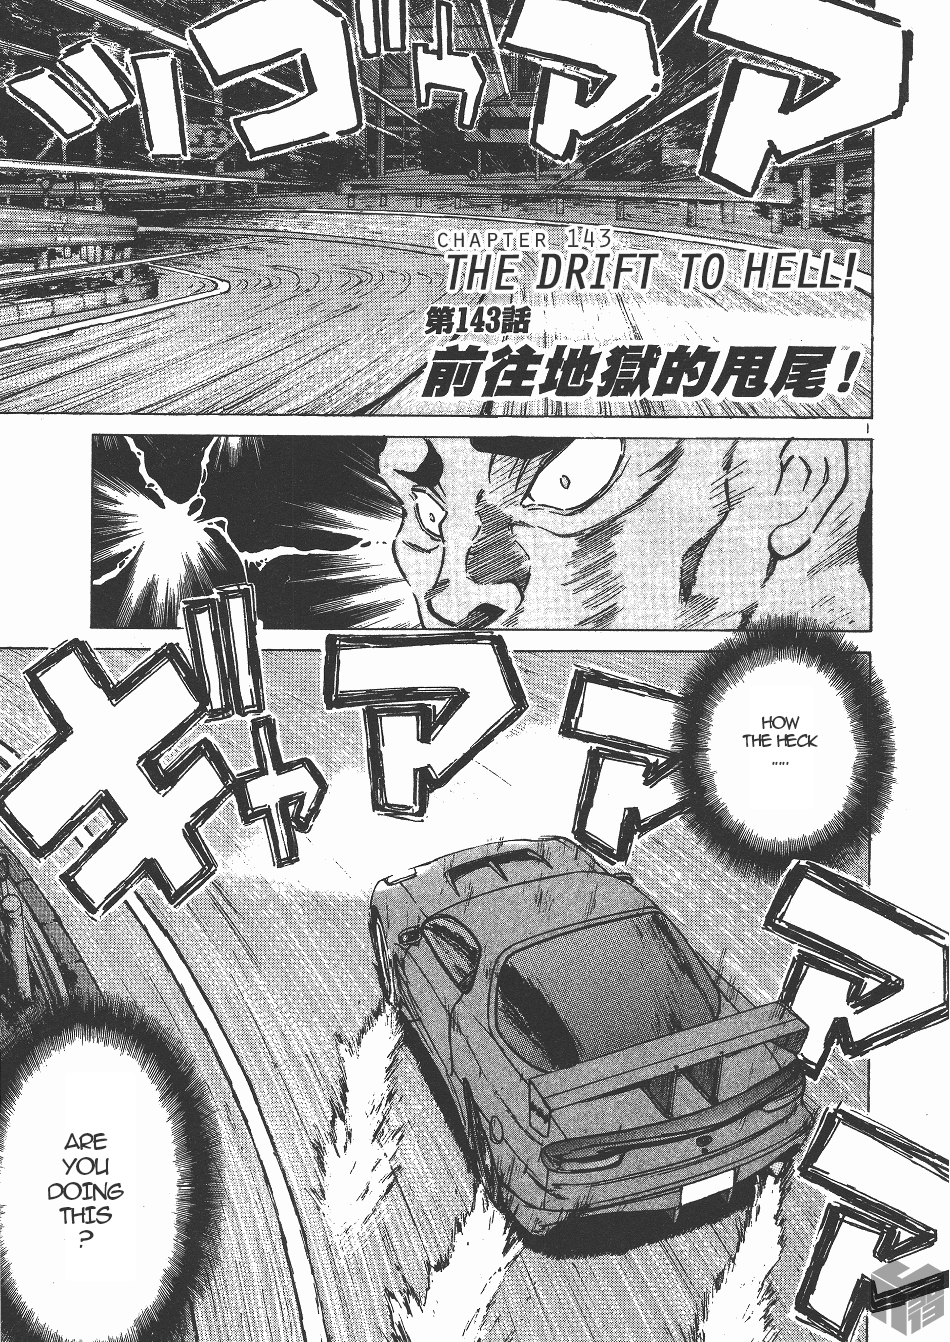 Over Rev! Vol.13 Chapter 143: The Drift To Hell! - Picture 1